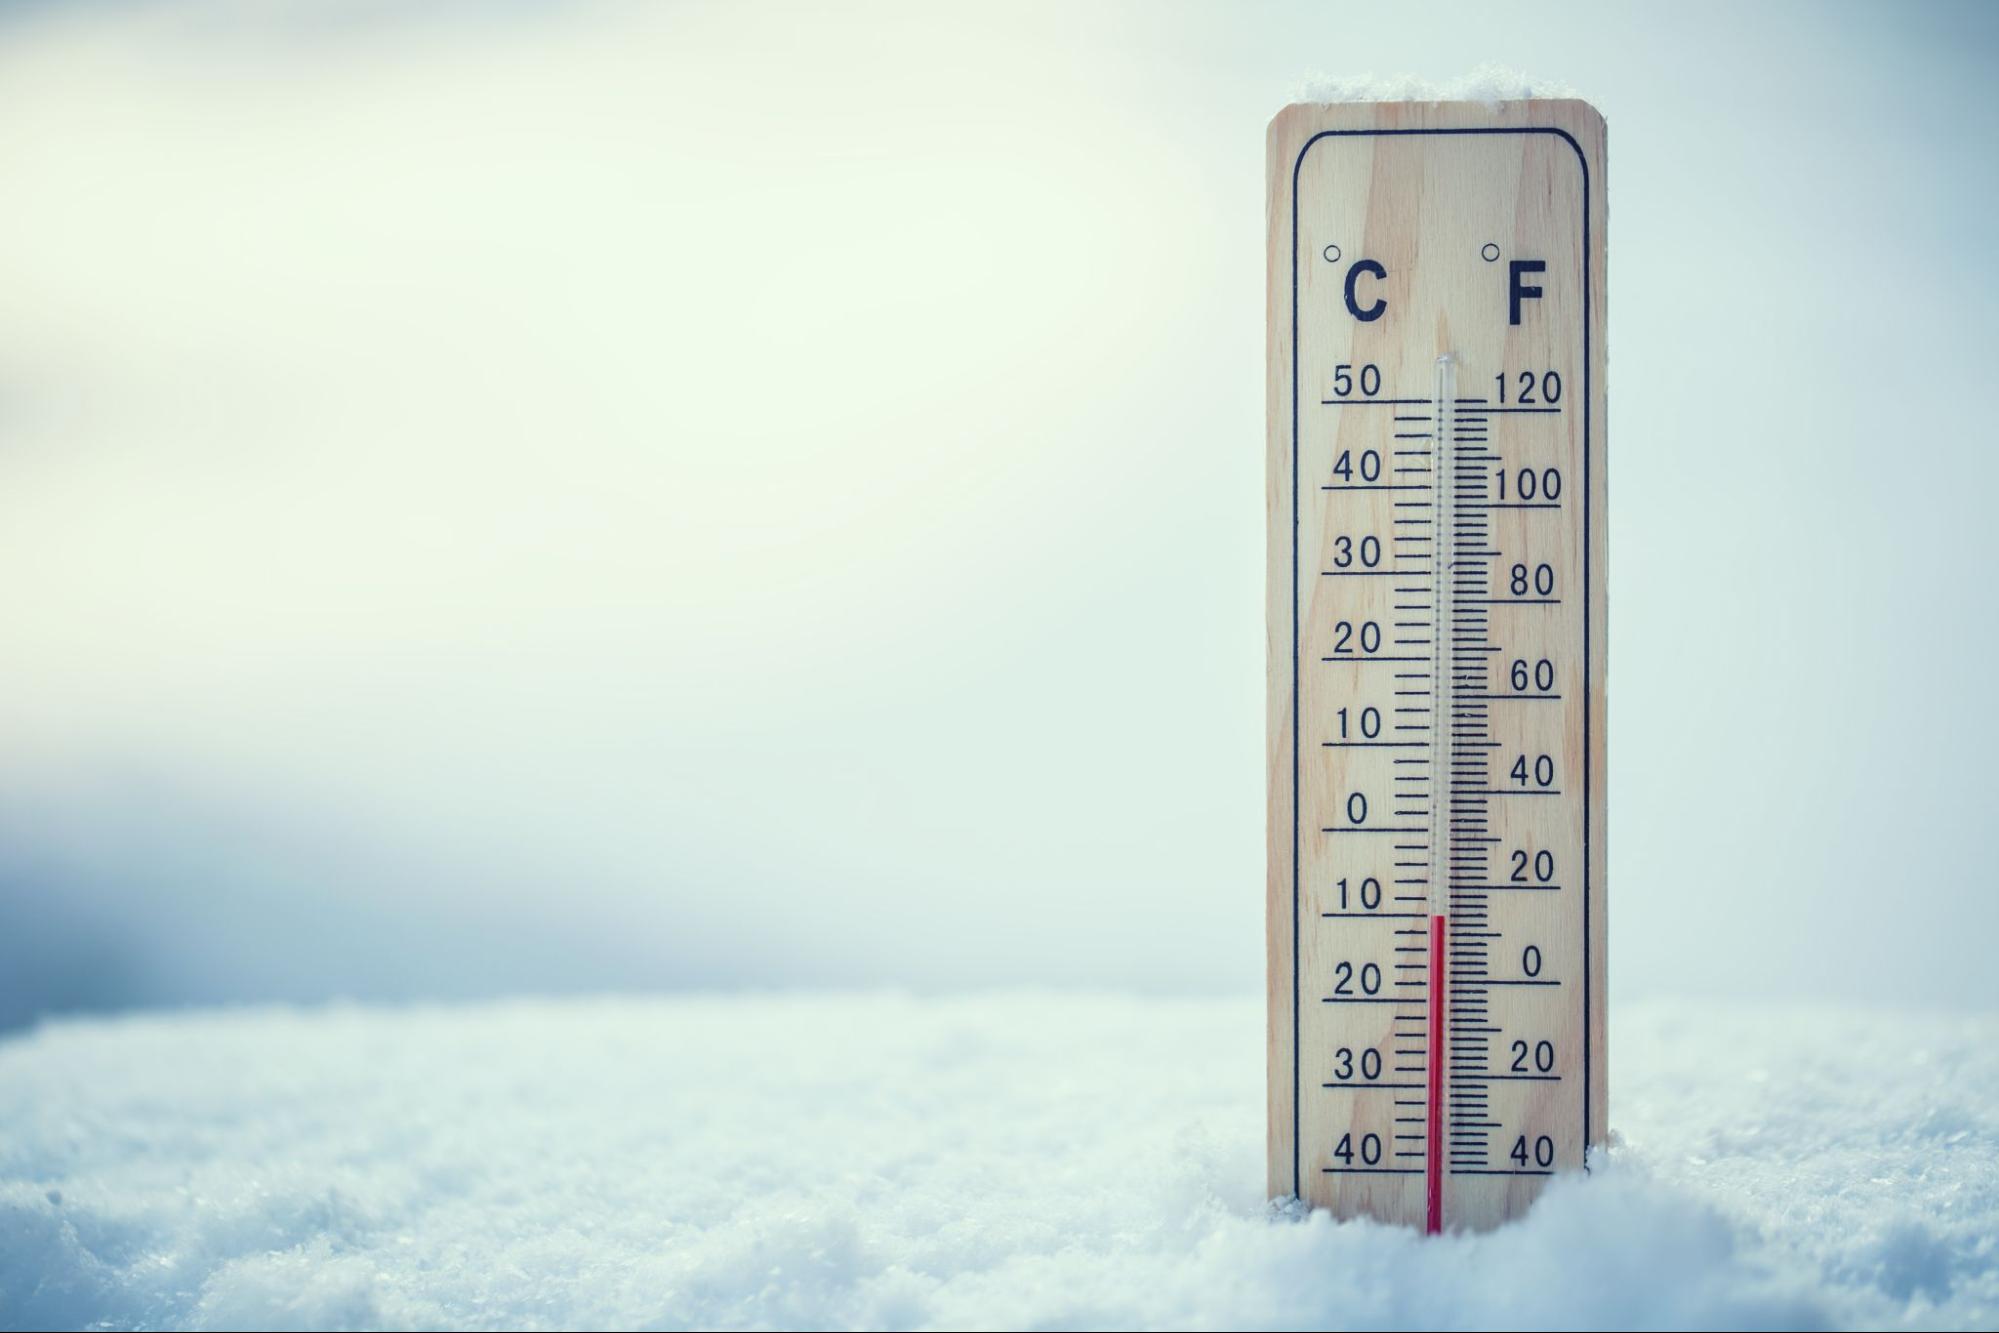 Mercury thermometer on snow shows low temperatures